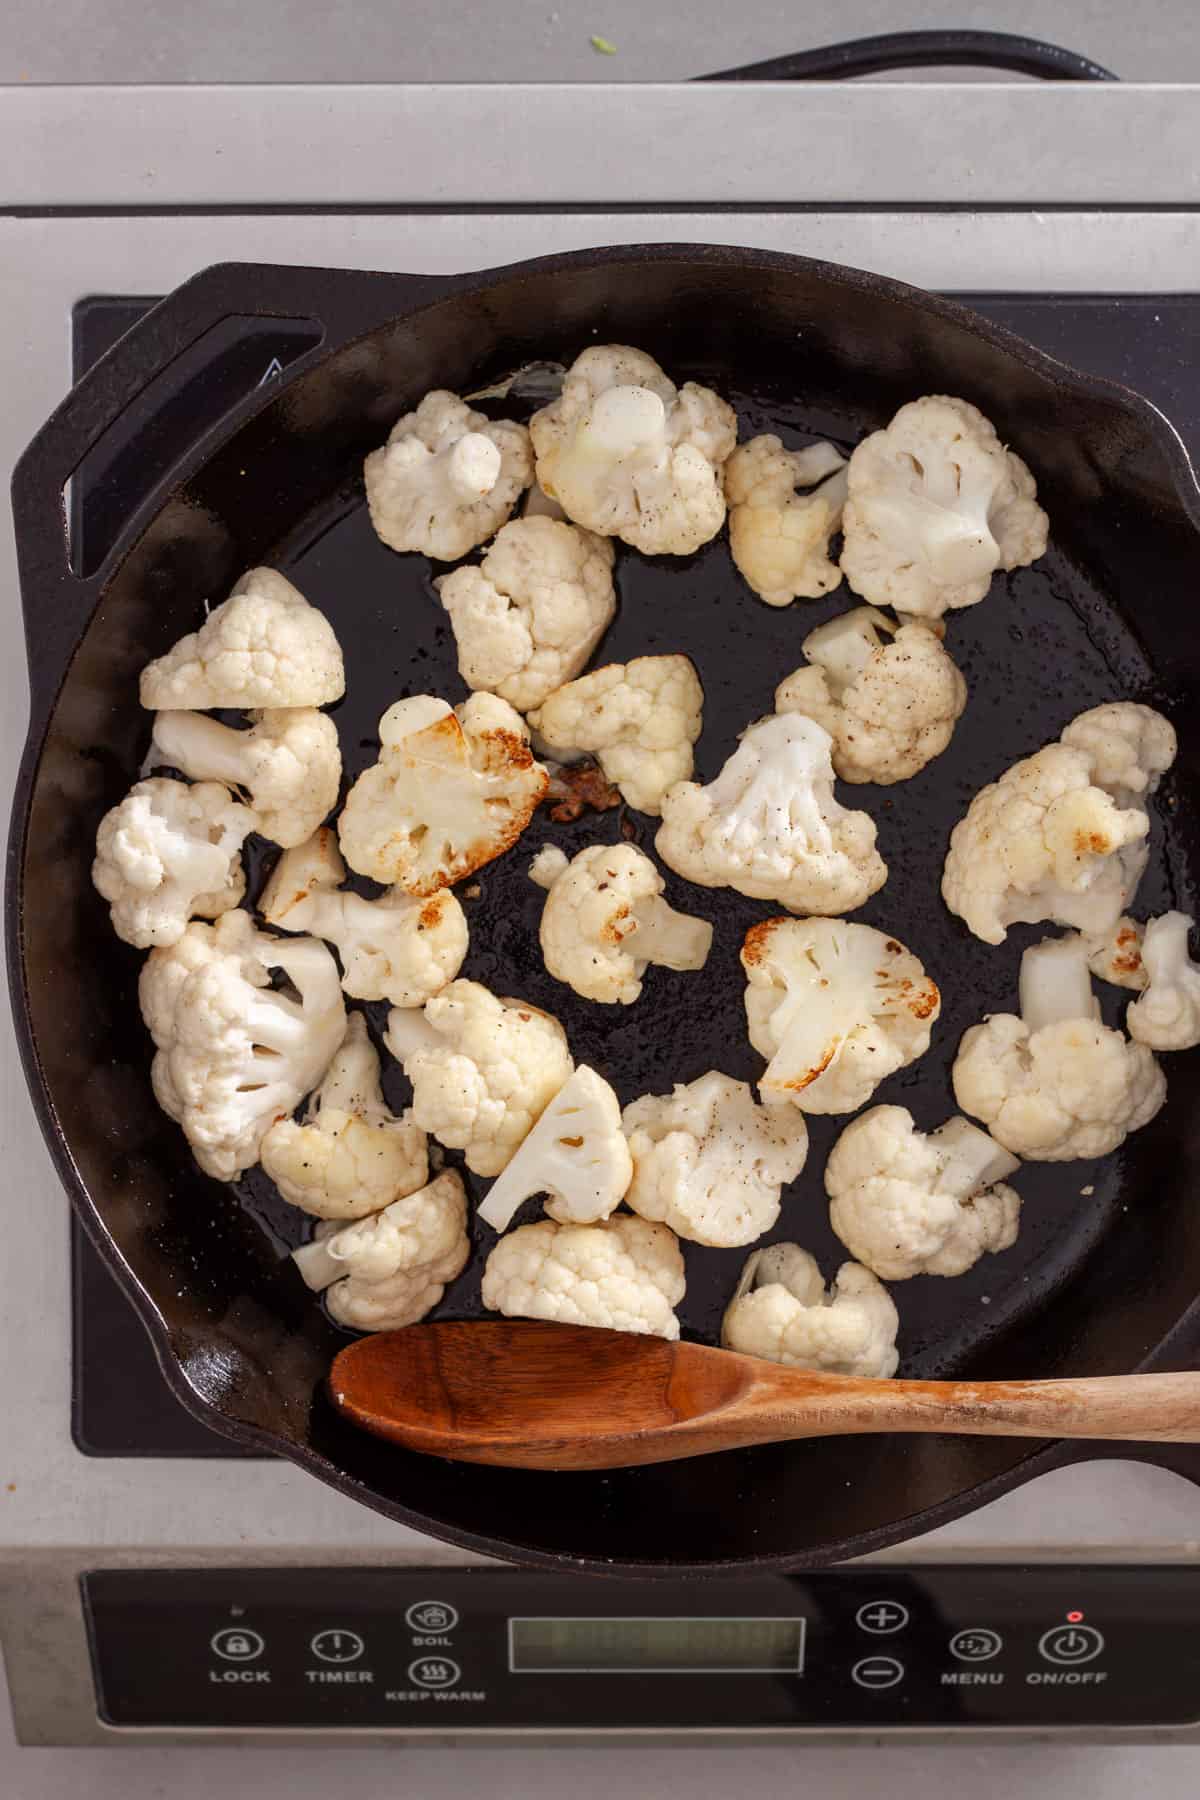 Cauliflower florets getting seared in a large cast iron skillet.